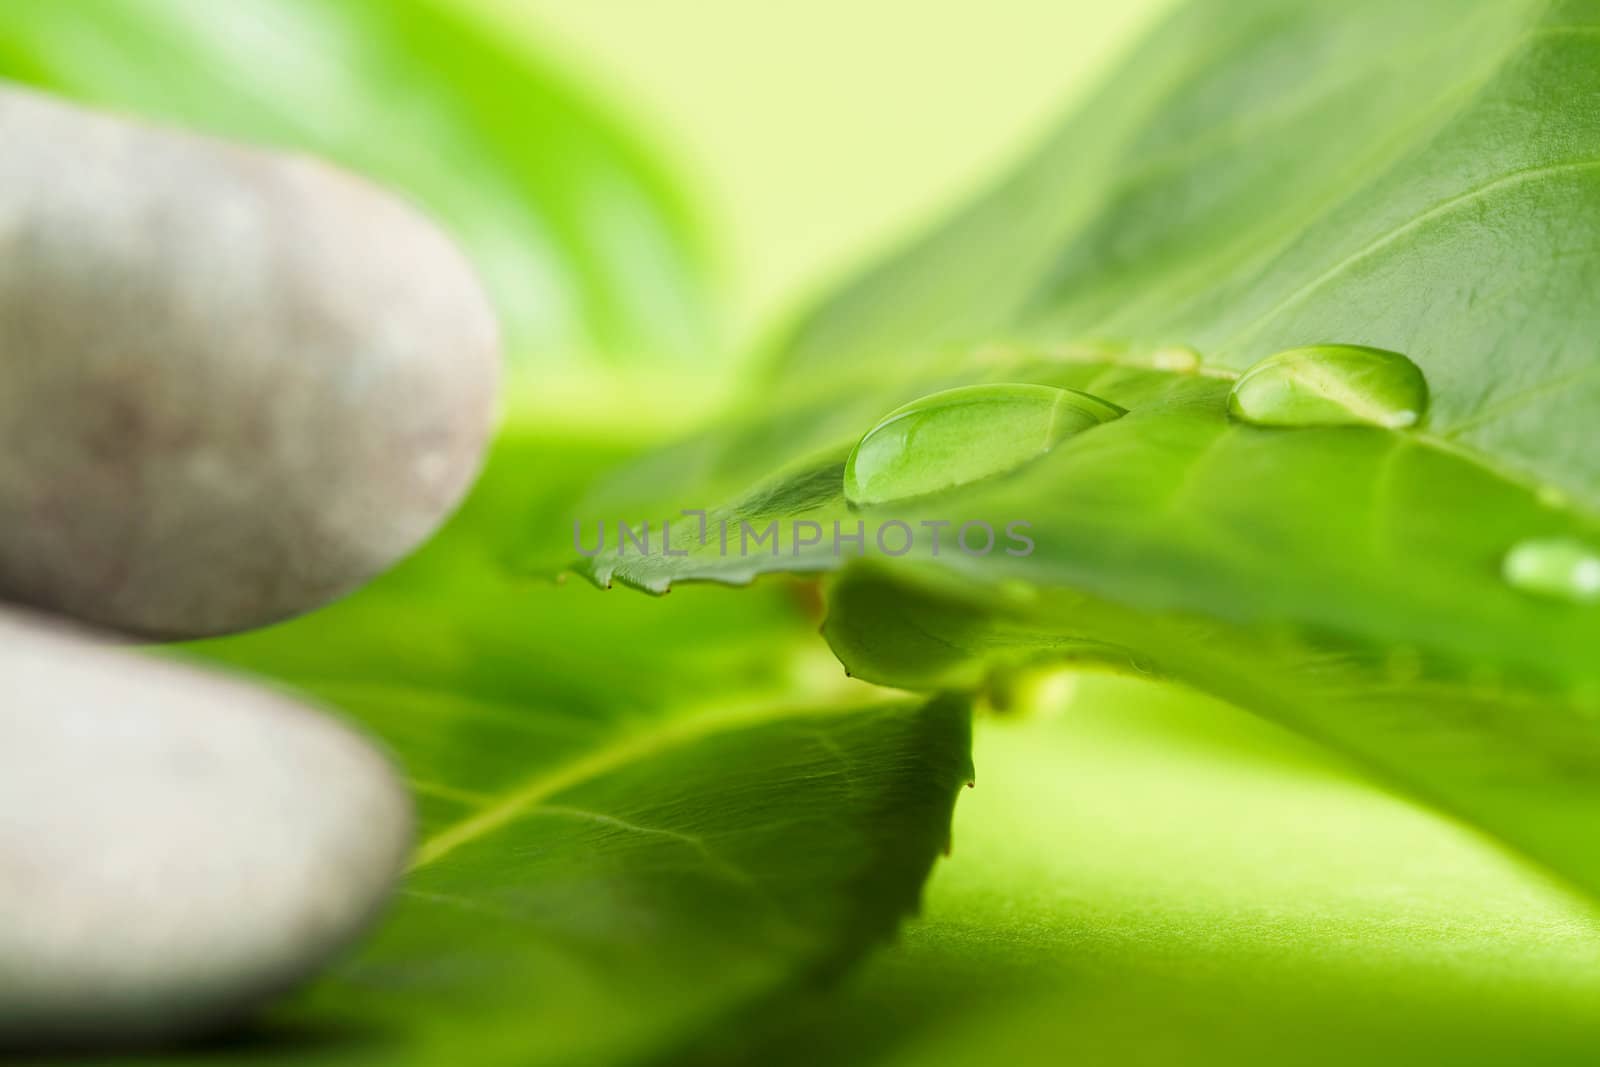 Water drops on a green leaf in front of a light/luminiscent green/yellow background with massage stones